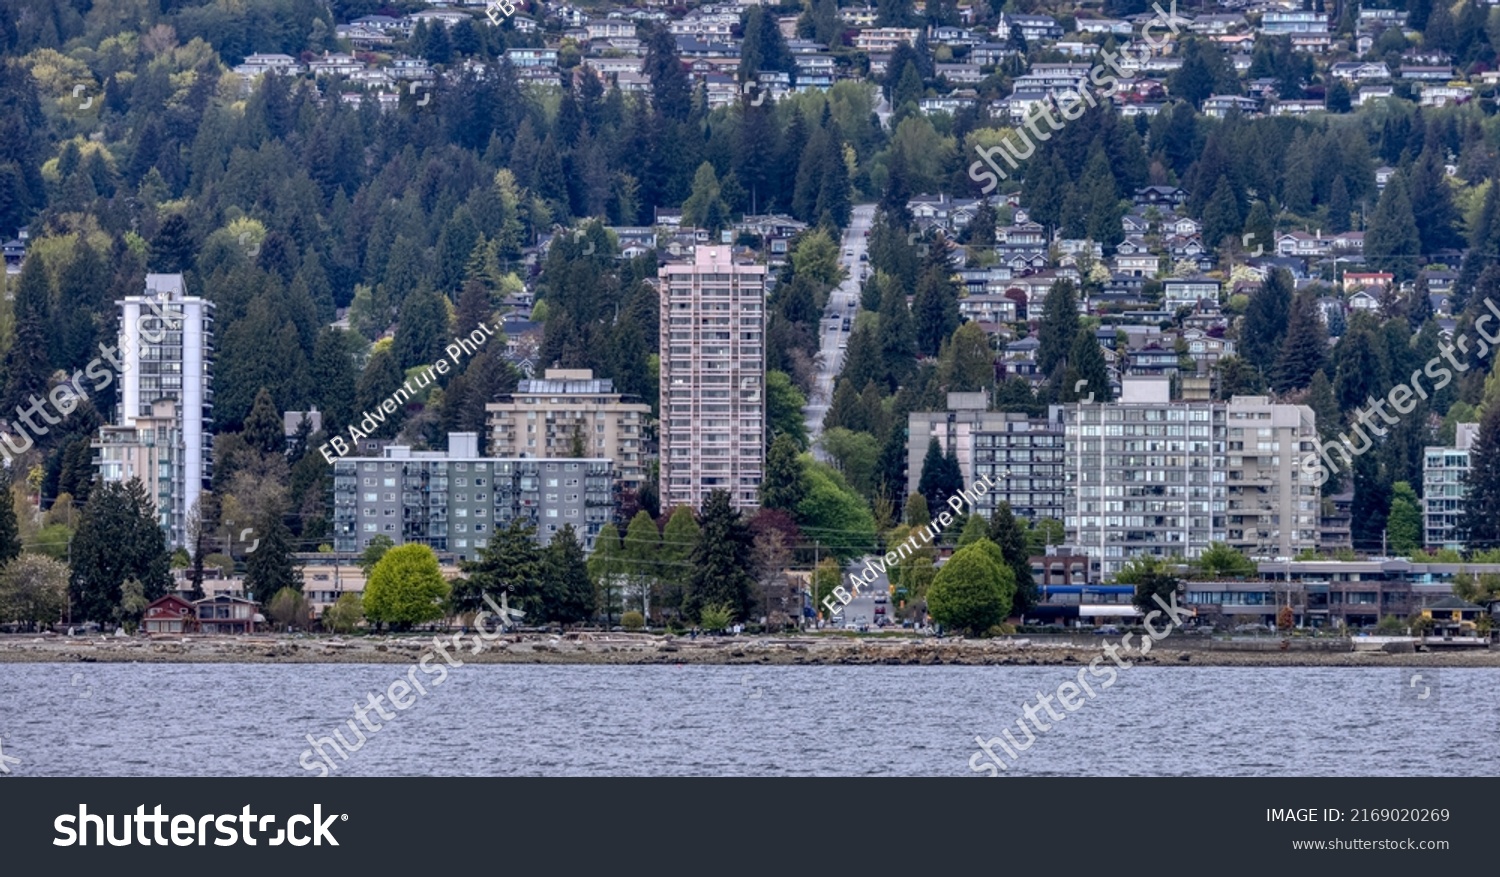 Residential Buildings in a modern city on the West Coast of Pacific Ocean. West Vancouver, British Columbia, Canada. #2169020269